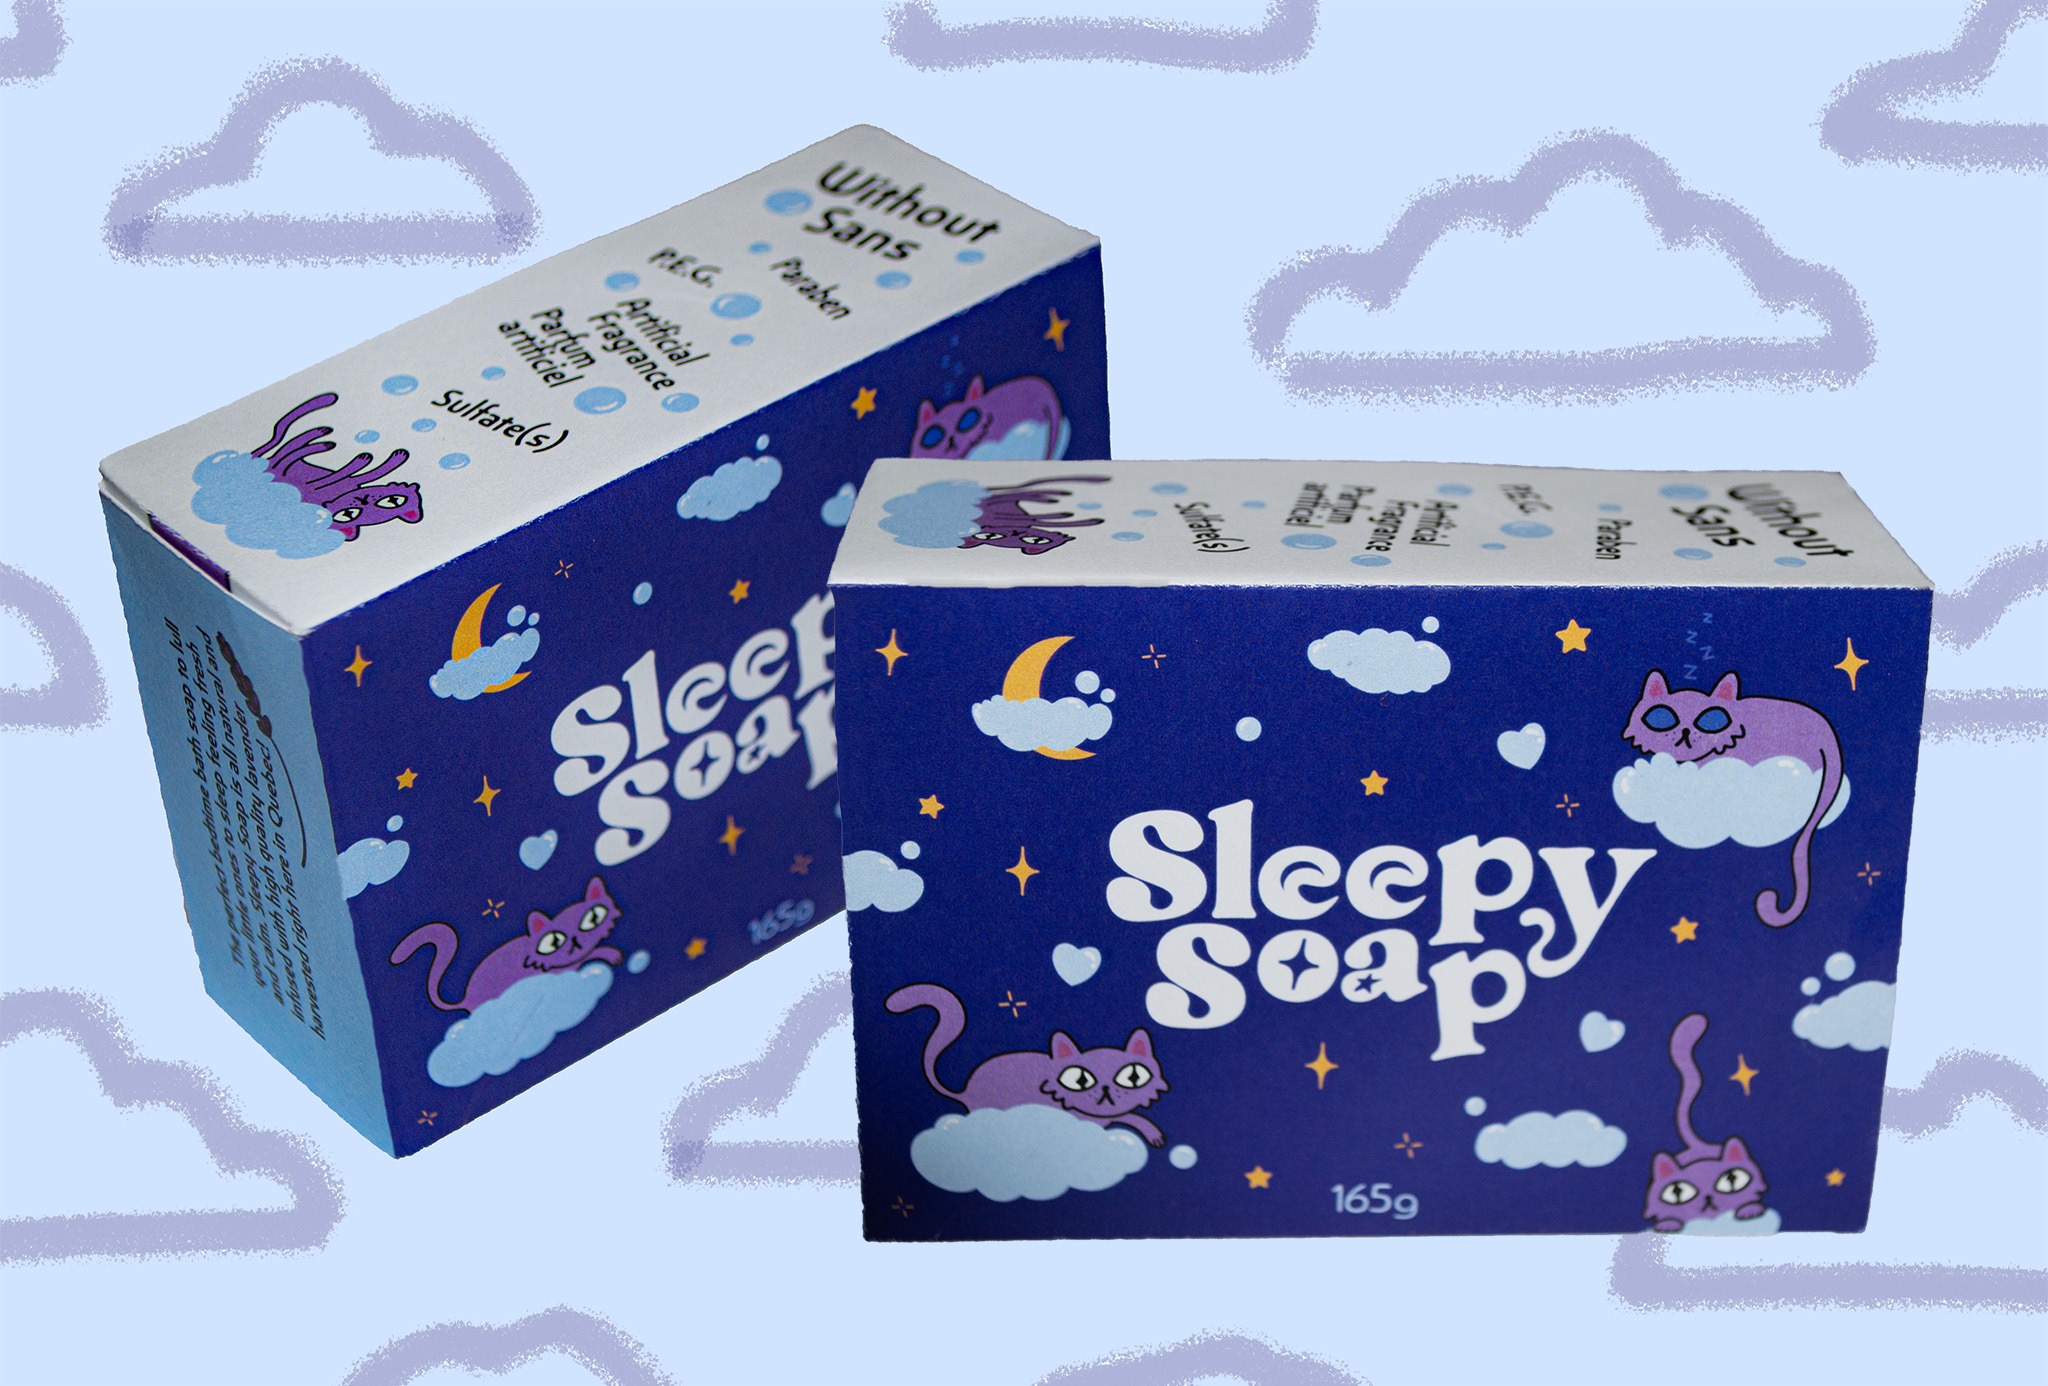 Packaging for a children's soap bar called sleepy soap displayed in front of a blue background with cloud drawings.